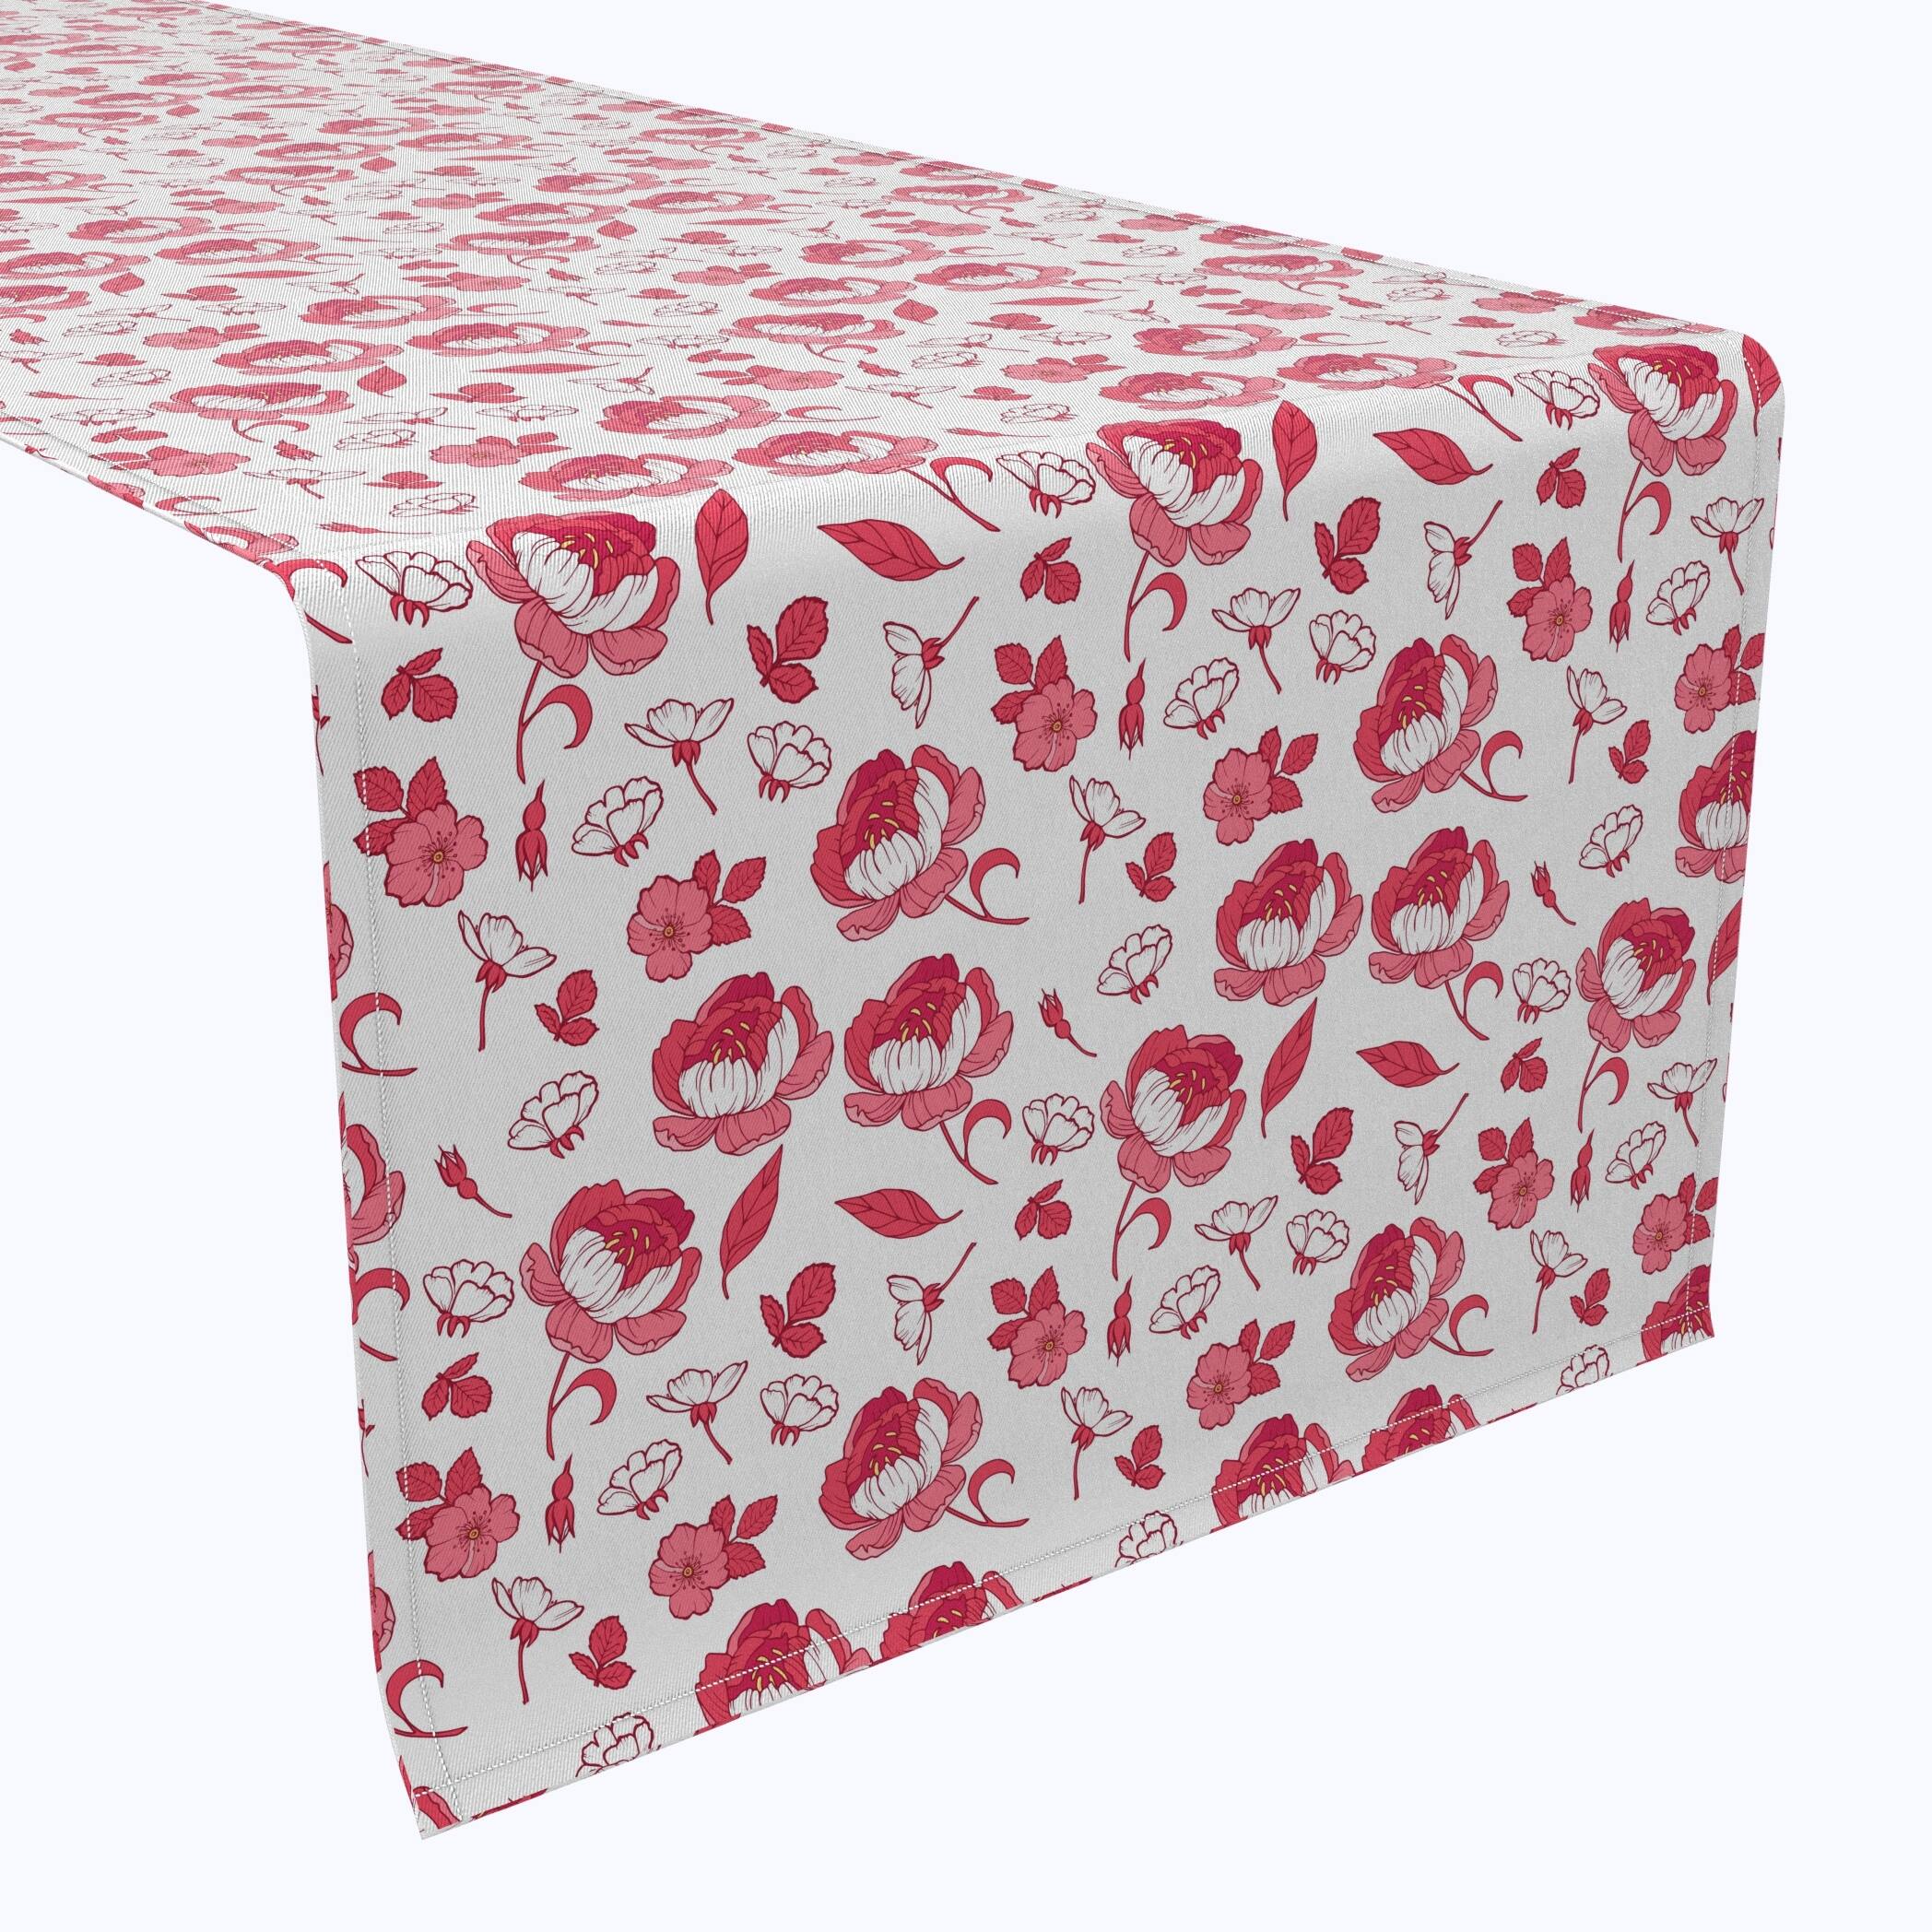 Fabric Textile Products, Inc. Table Runner, 100% Cotton, 16x108", Pink Floral Design